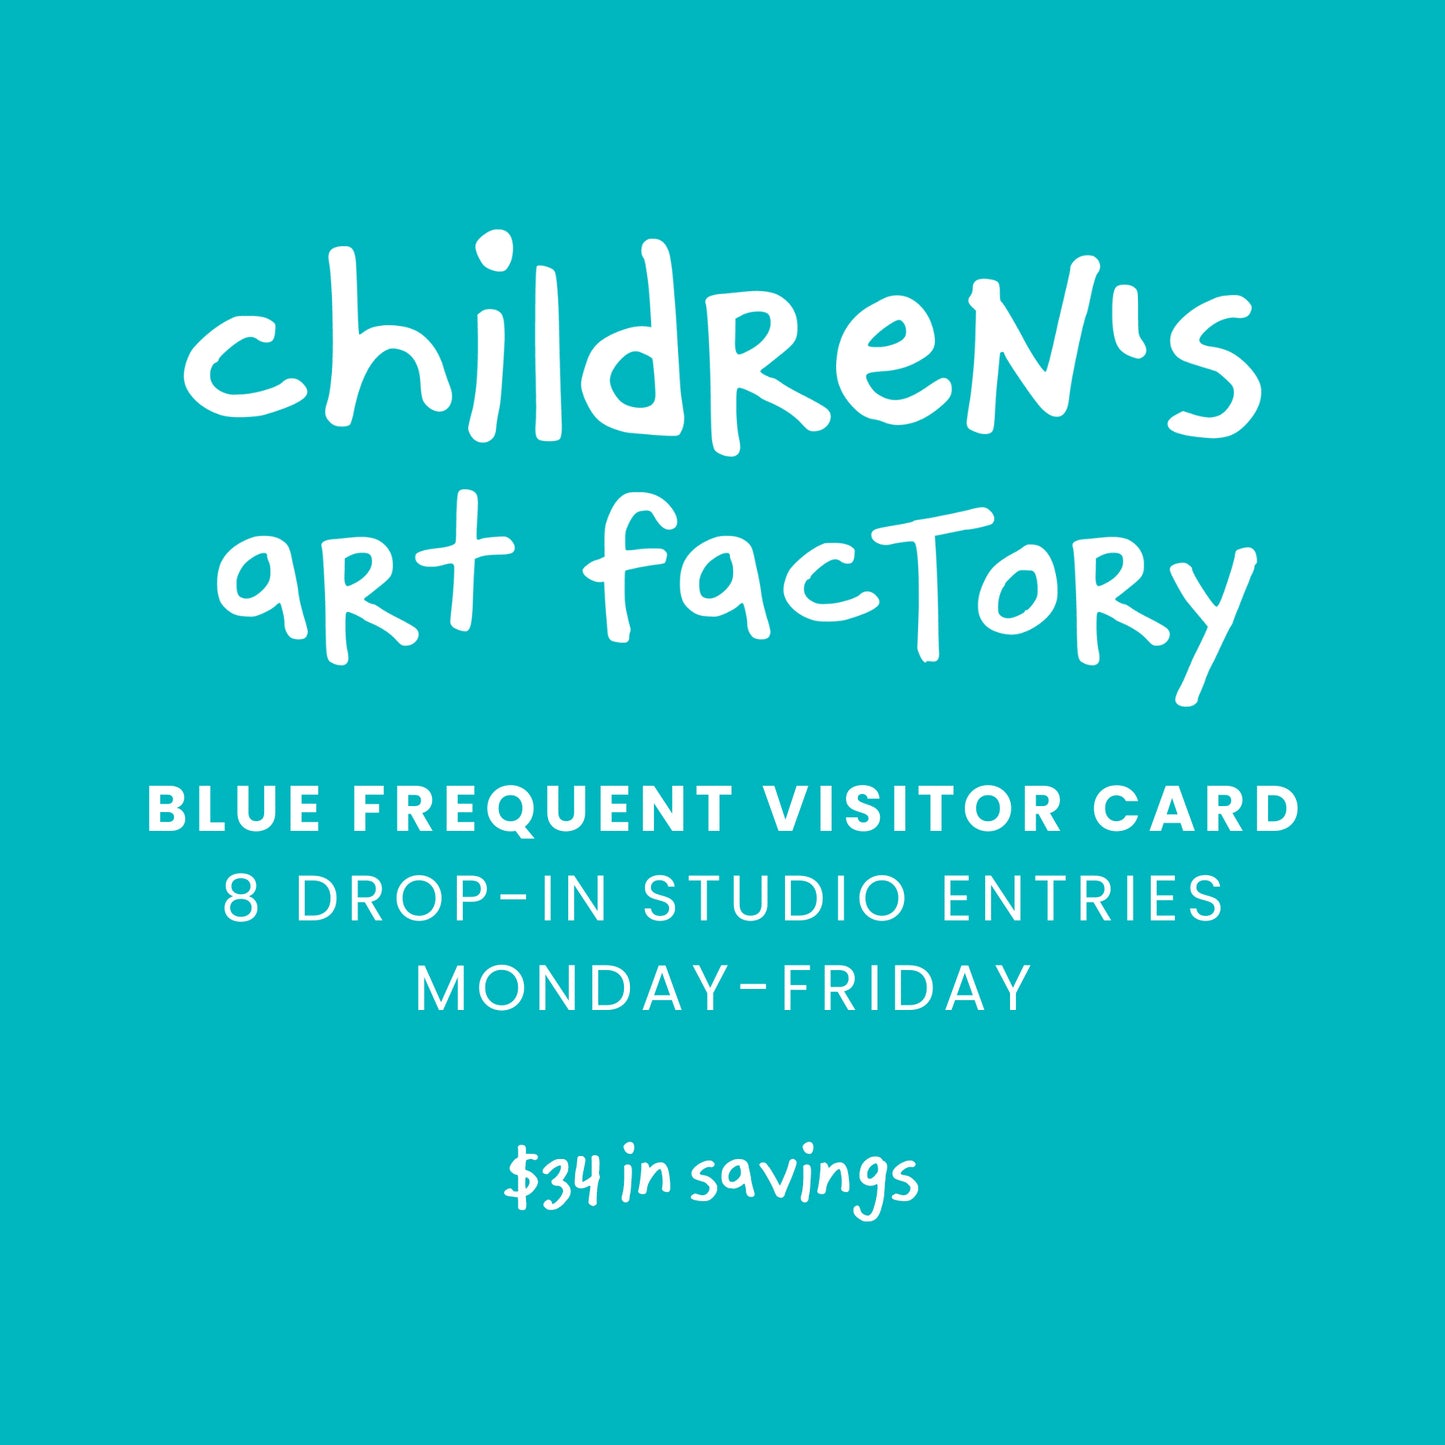 Blue Frequent Visitor Card: 8 Open Studio Entries Monday-Friday. $34 in savings.